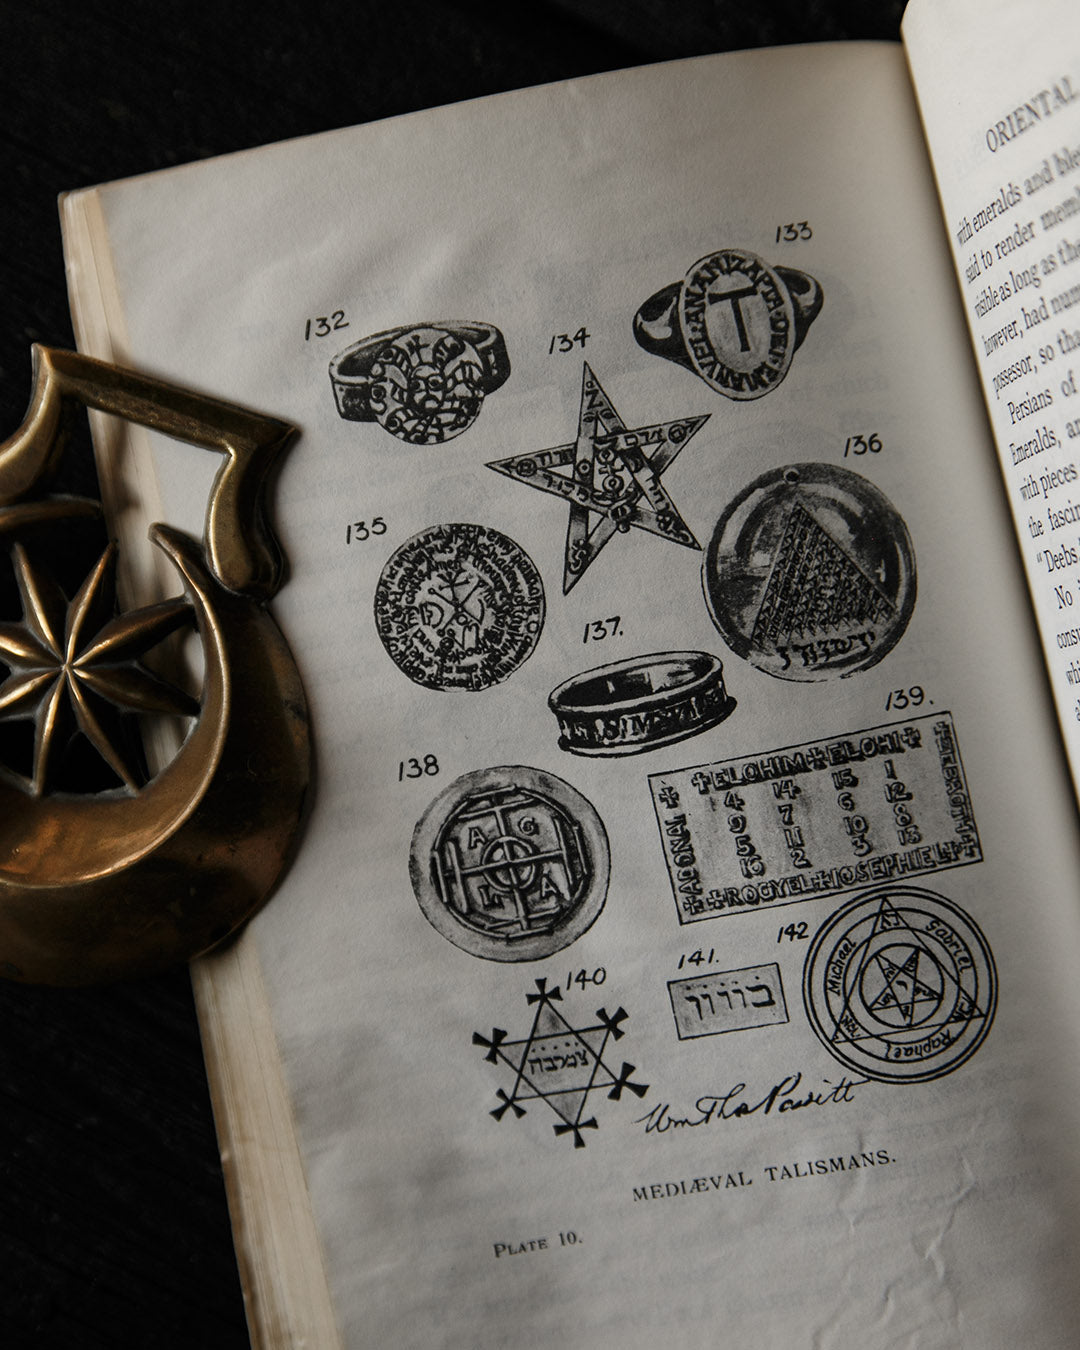 The Book of Talismans & Zodiacal Gems